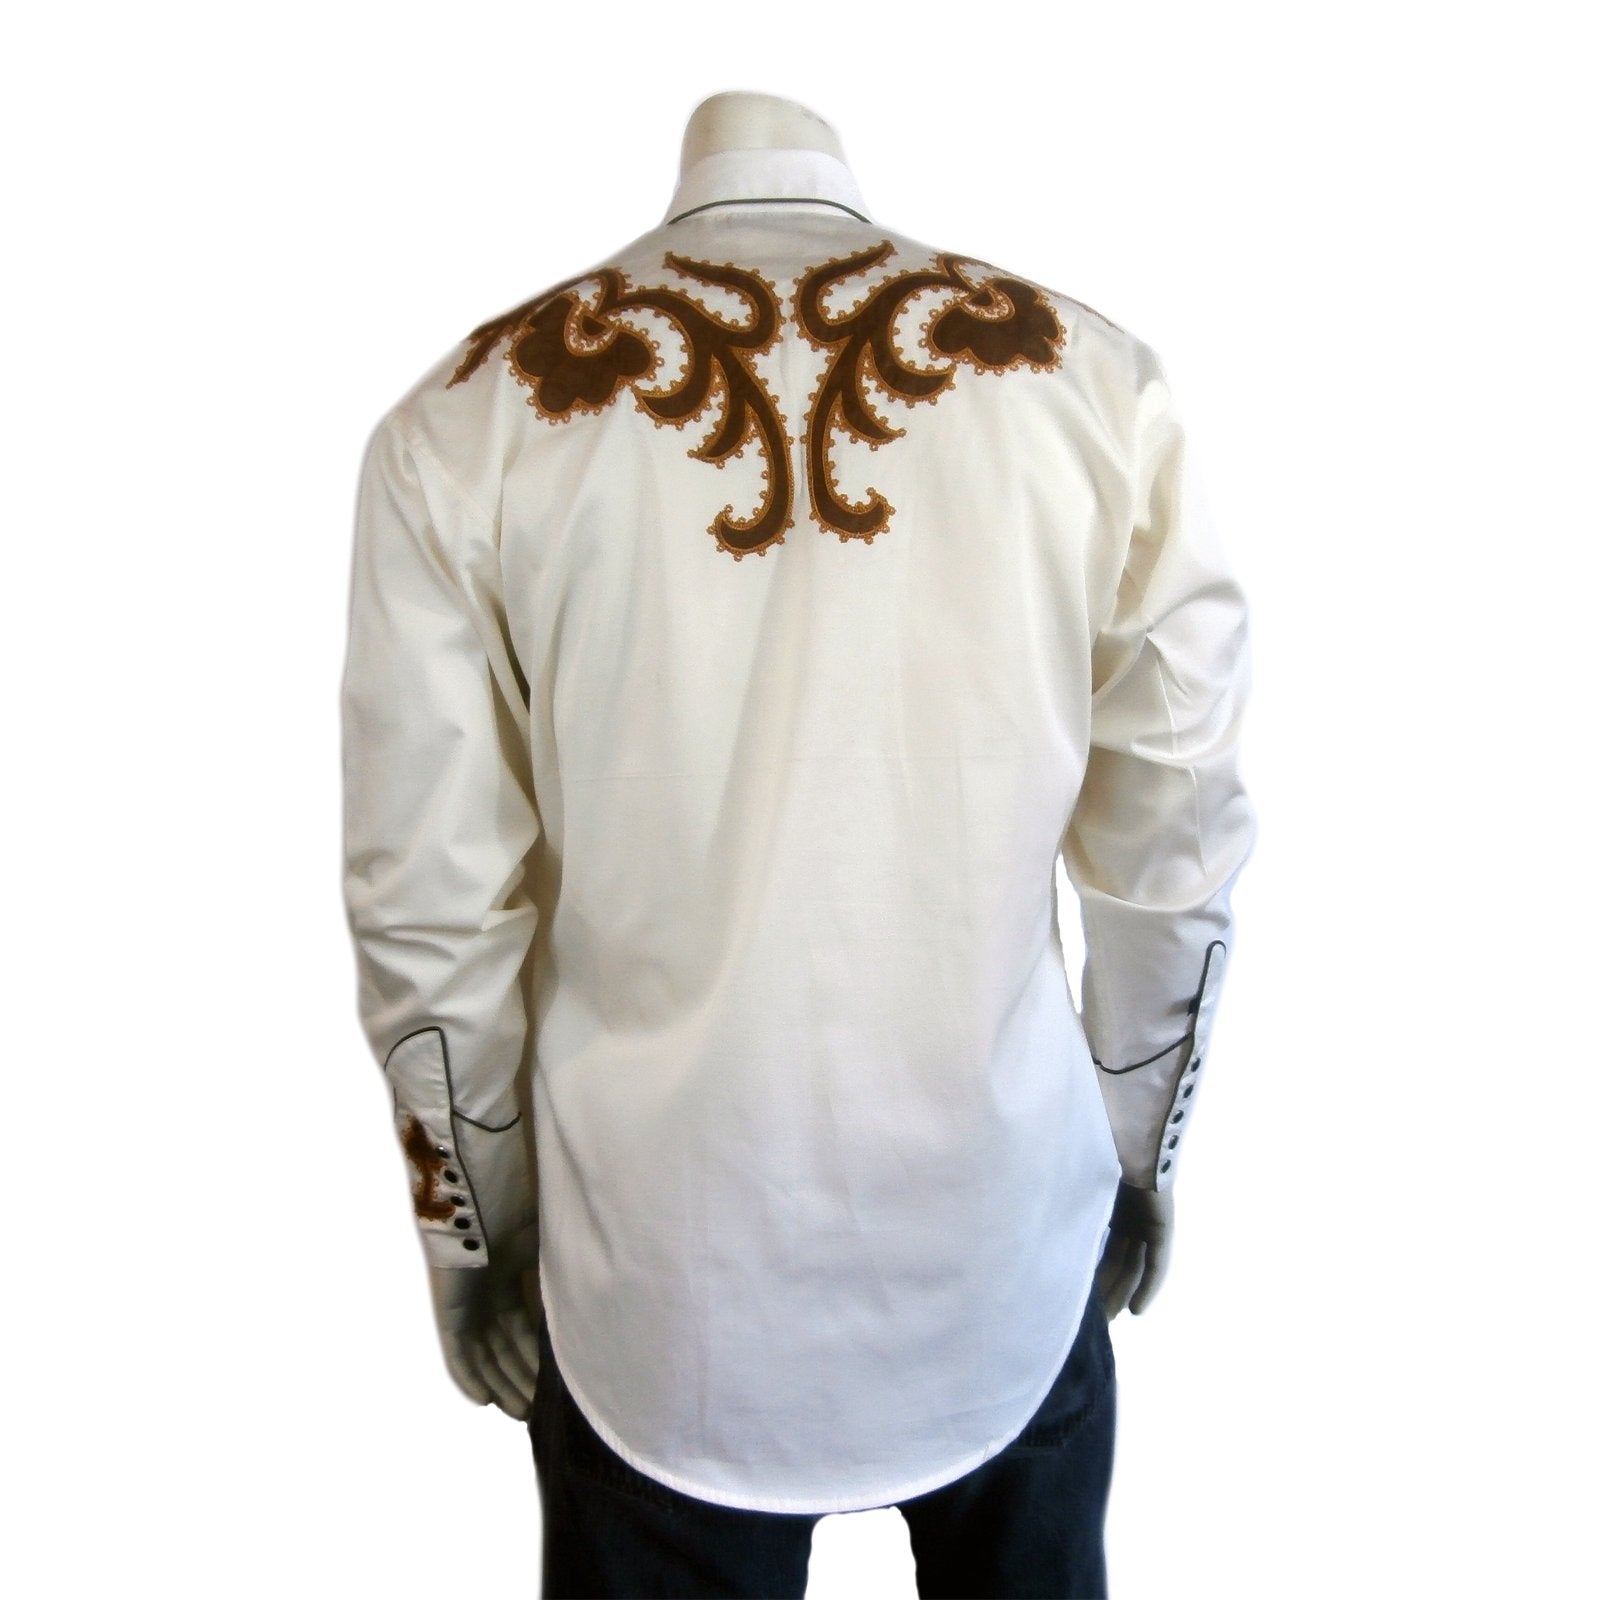 Rockmount Ranch Wear Men's Chamois & Embroidery Shirt Front #176710